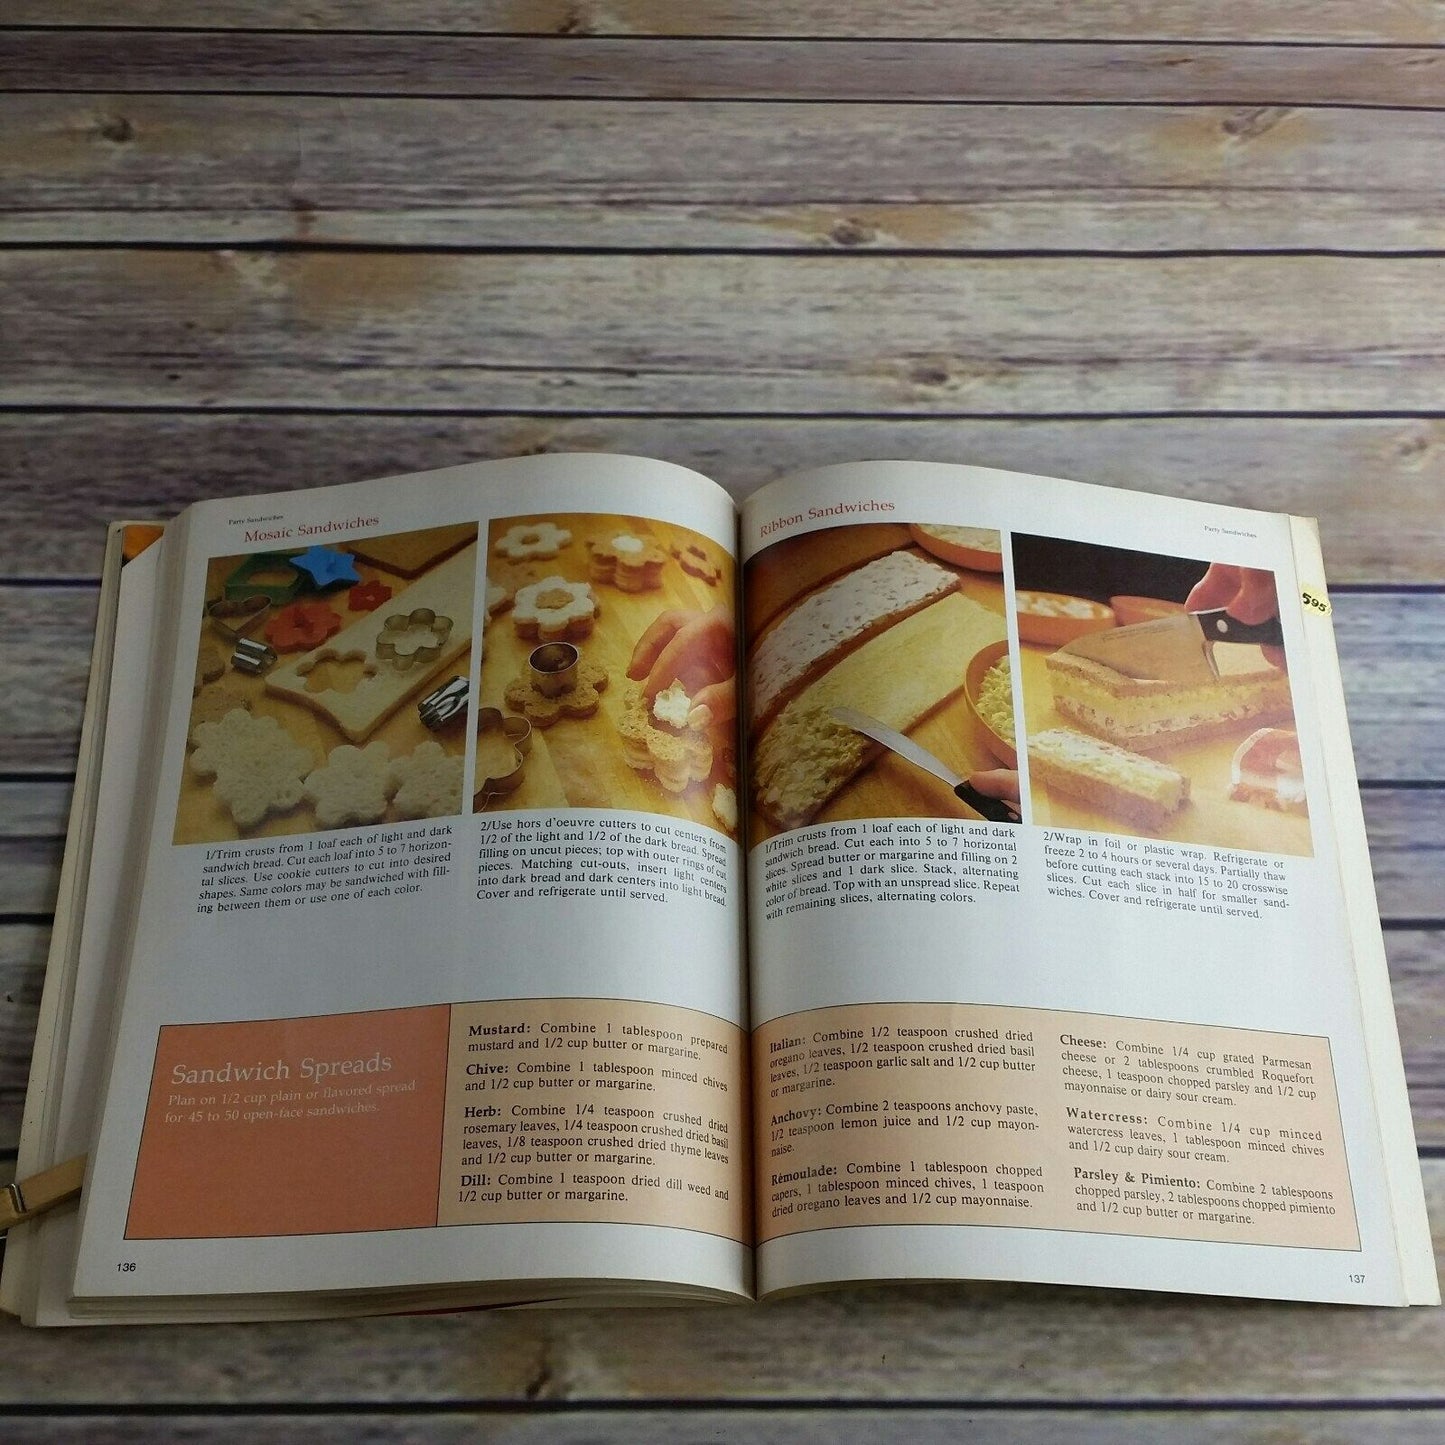 Vintage Appetizers Cookbook Appetizer Recipes HP Books 1980 Mable Hoffman Softcover Color Photos